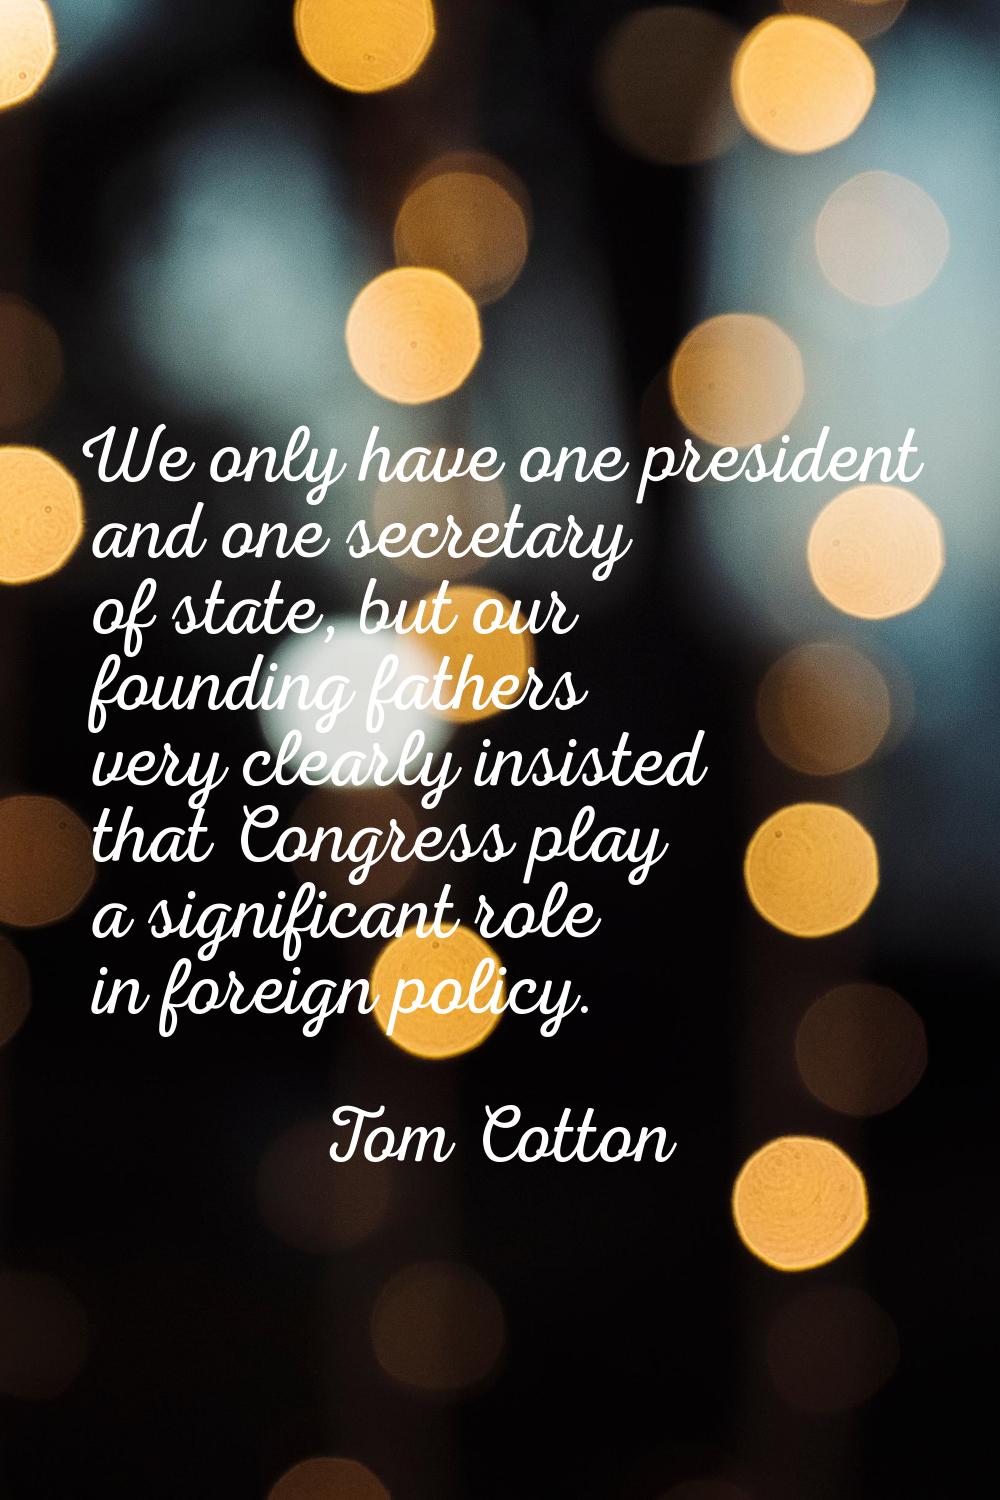 We only have one president and one secretary of state, but our founding fathers very clearly insist